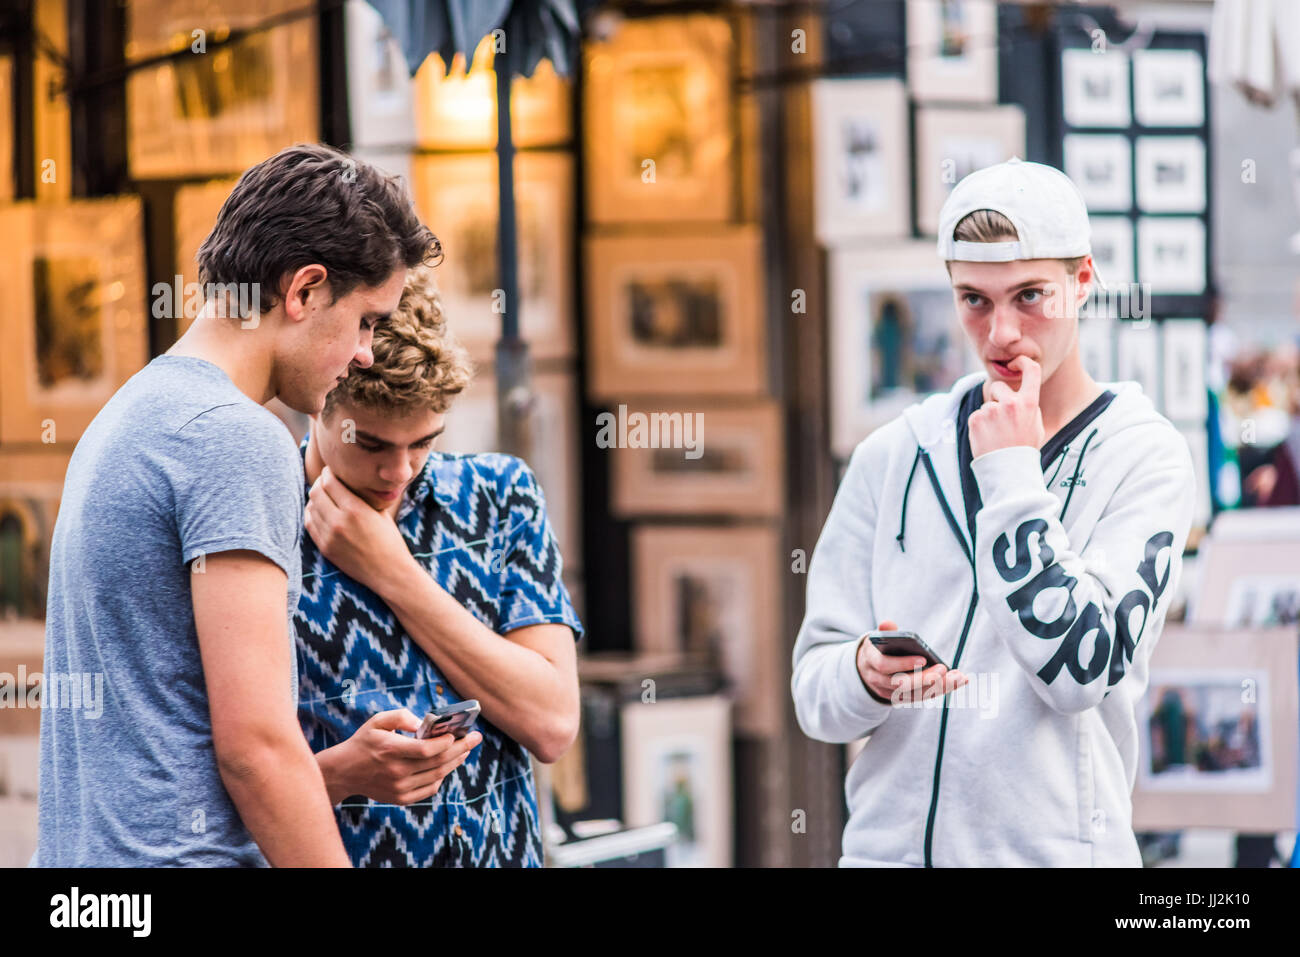 Montreal, Canada - May 27, 2017: Old town area with young boys looking at their smartphones in evening in Quebec region city Stock Photo